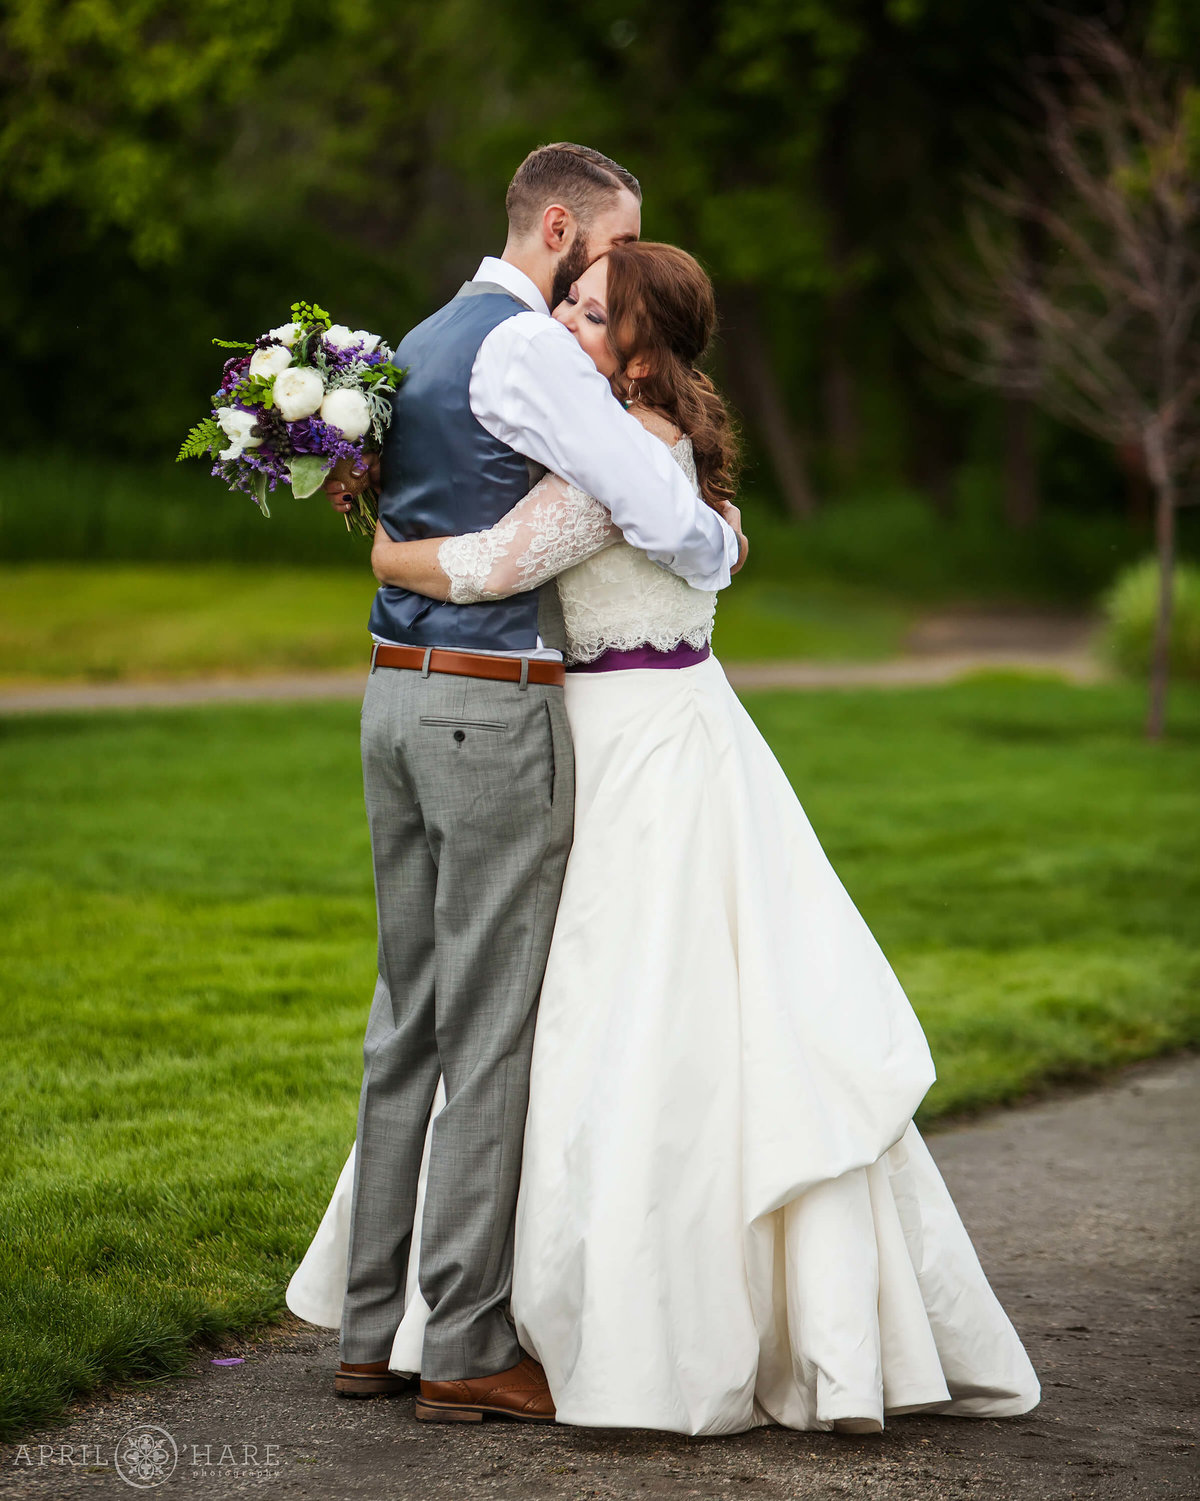 Sweet hug moment after wedding ceremony  at Chatfield Farms in Colorado